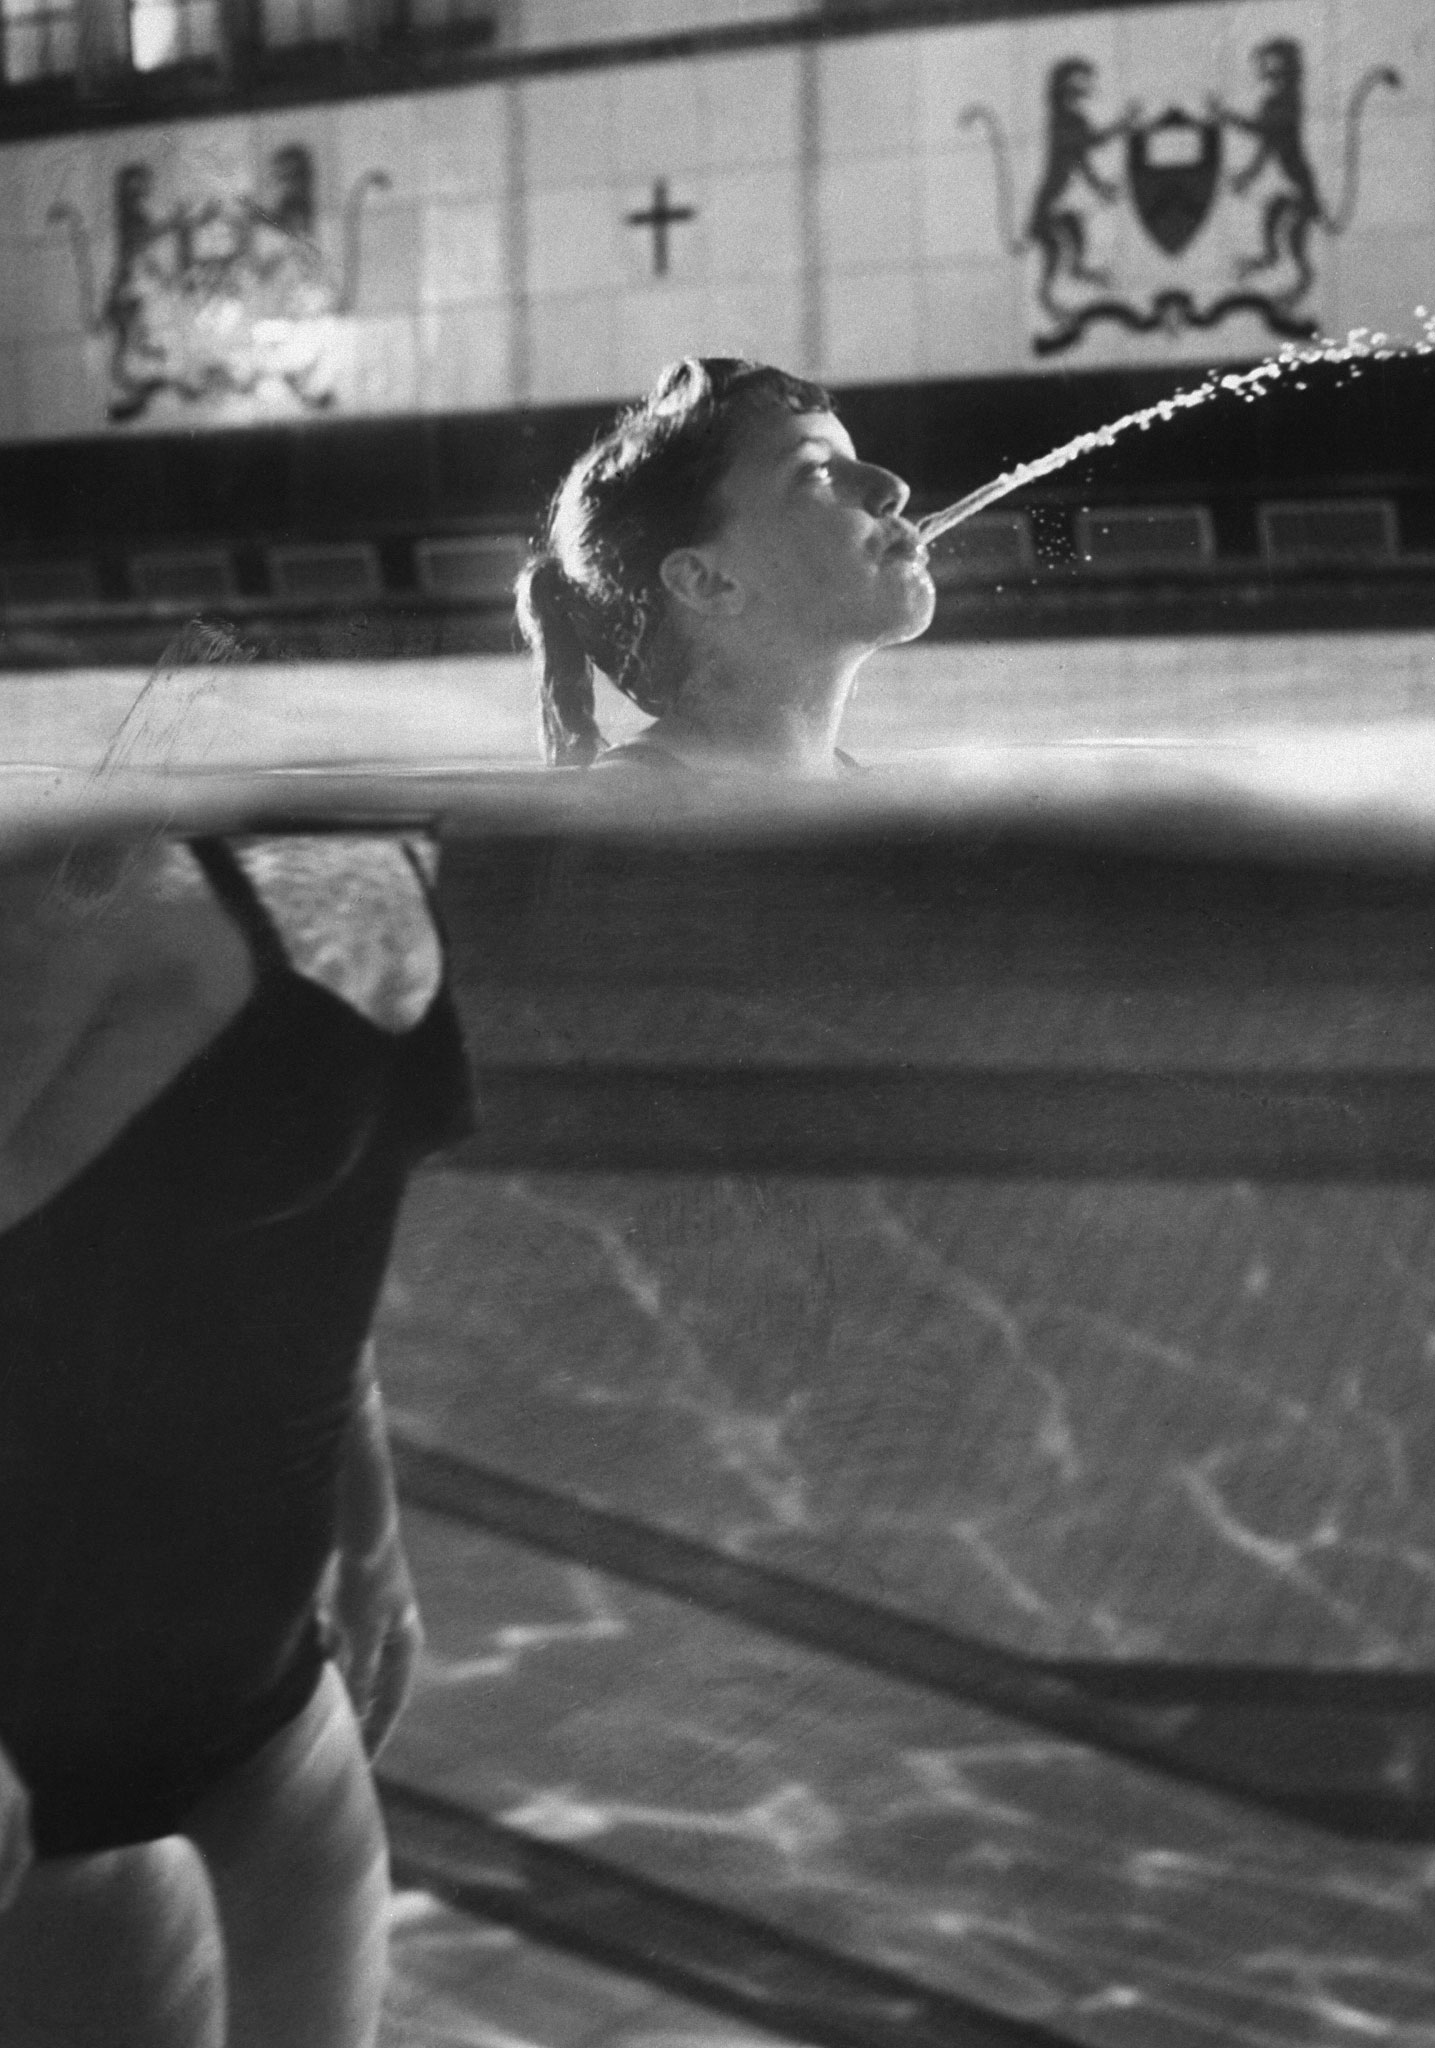 Swimmer Kathy Flicker spits water in a swimming pool in 1962.